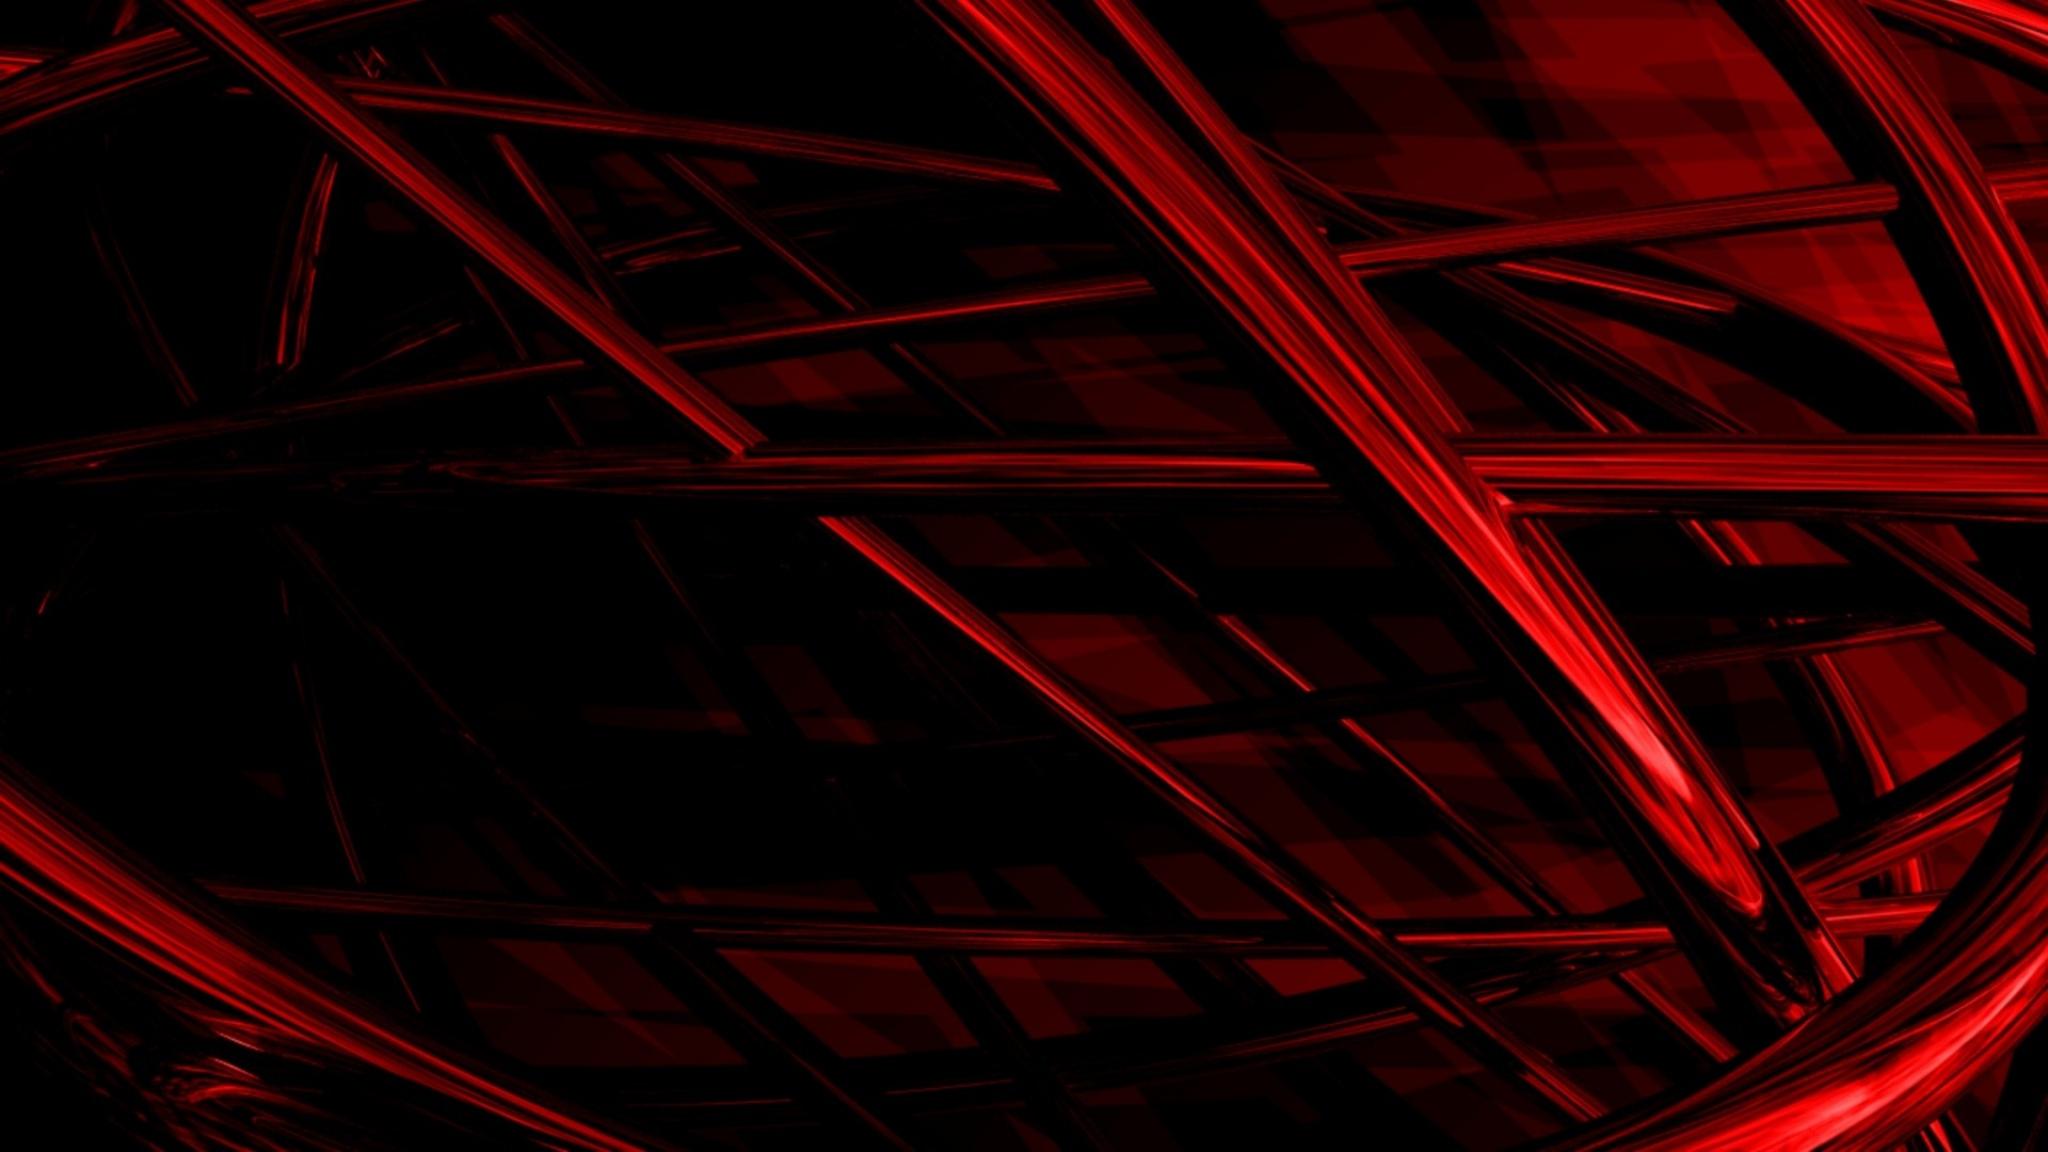 Red And Black 48x1152 Wallpapers Top Free Red And Black 48x1152 Backgrounds Wallpaperaccess